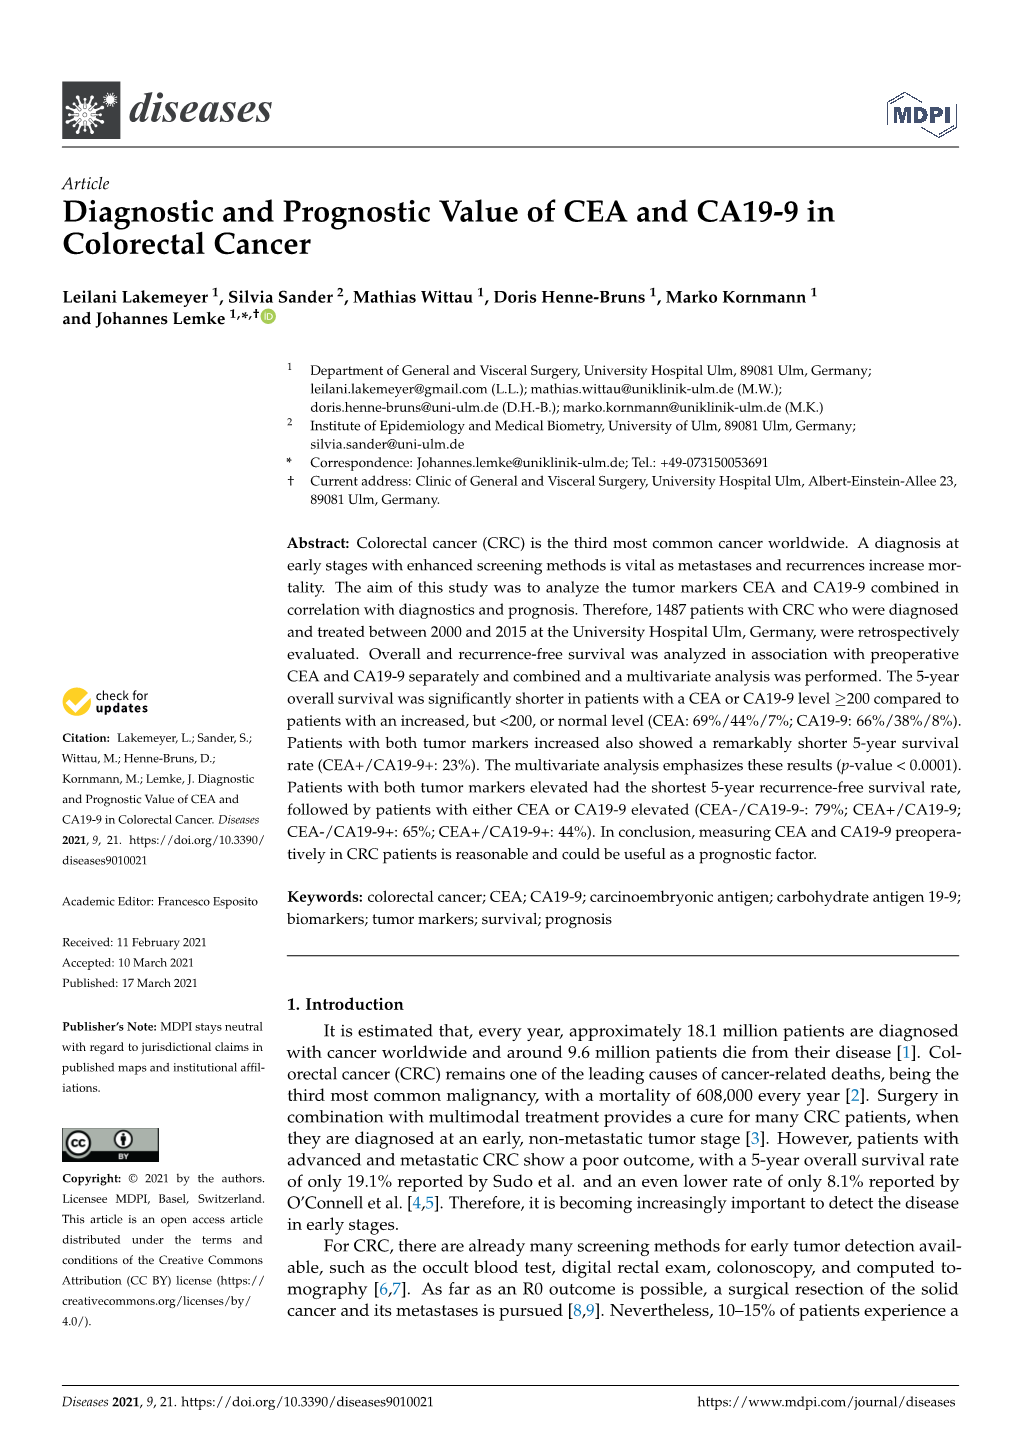 Diagnostic and Prognostic Value of CEA and CA19-9 in Colorectal Cancer